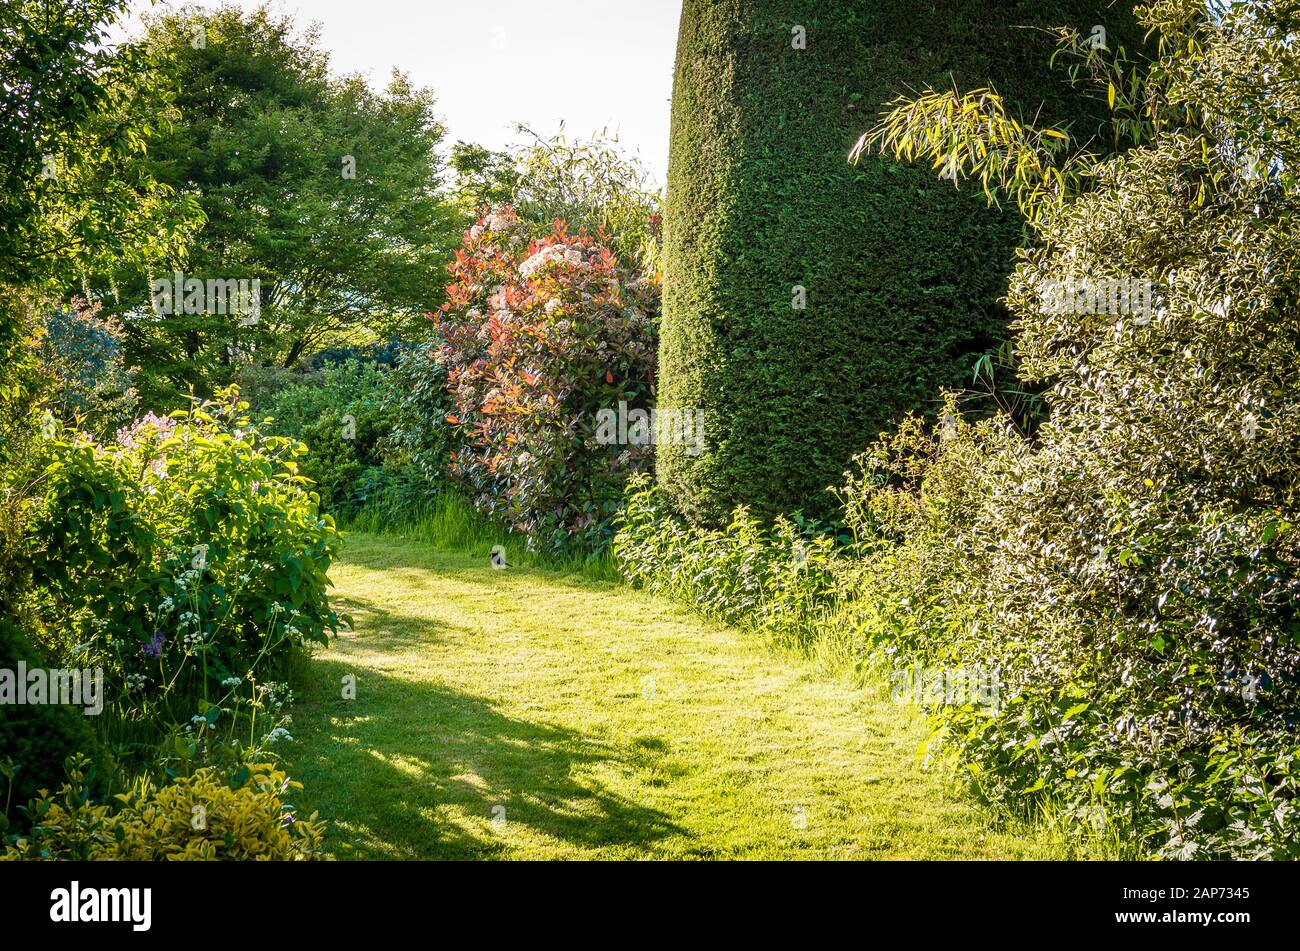 Early morning light in a quiet corner of an English garden in mid-Spring showing evergreen and deciduous trees and a broad grass path Stock Photo